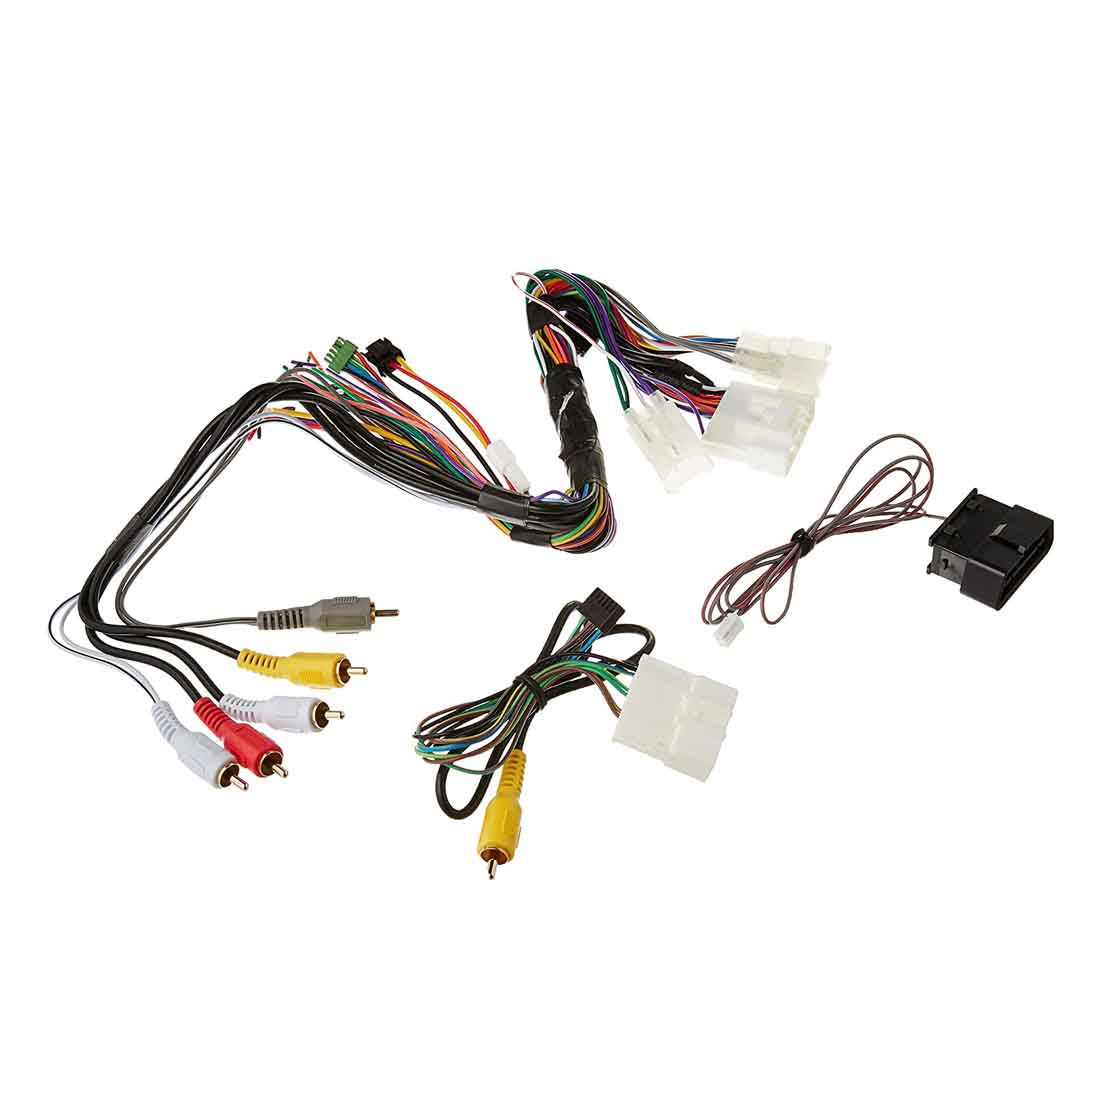 iDataLink Maestro TO2 HRN-RR-TO2 Installation T-Harness for 2012-16 Toyota Vehicles